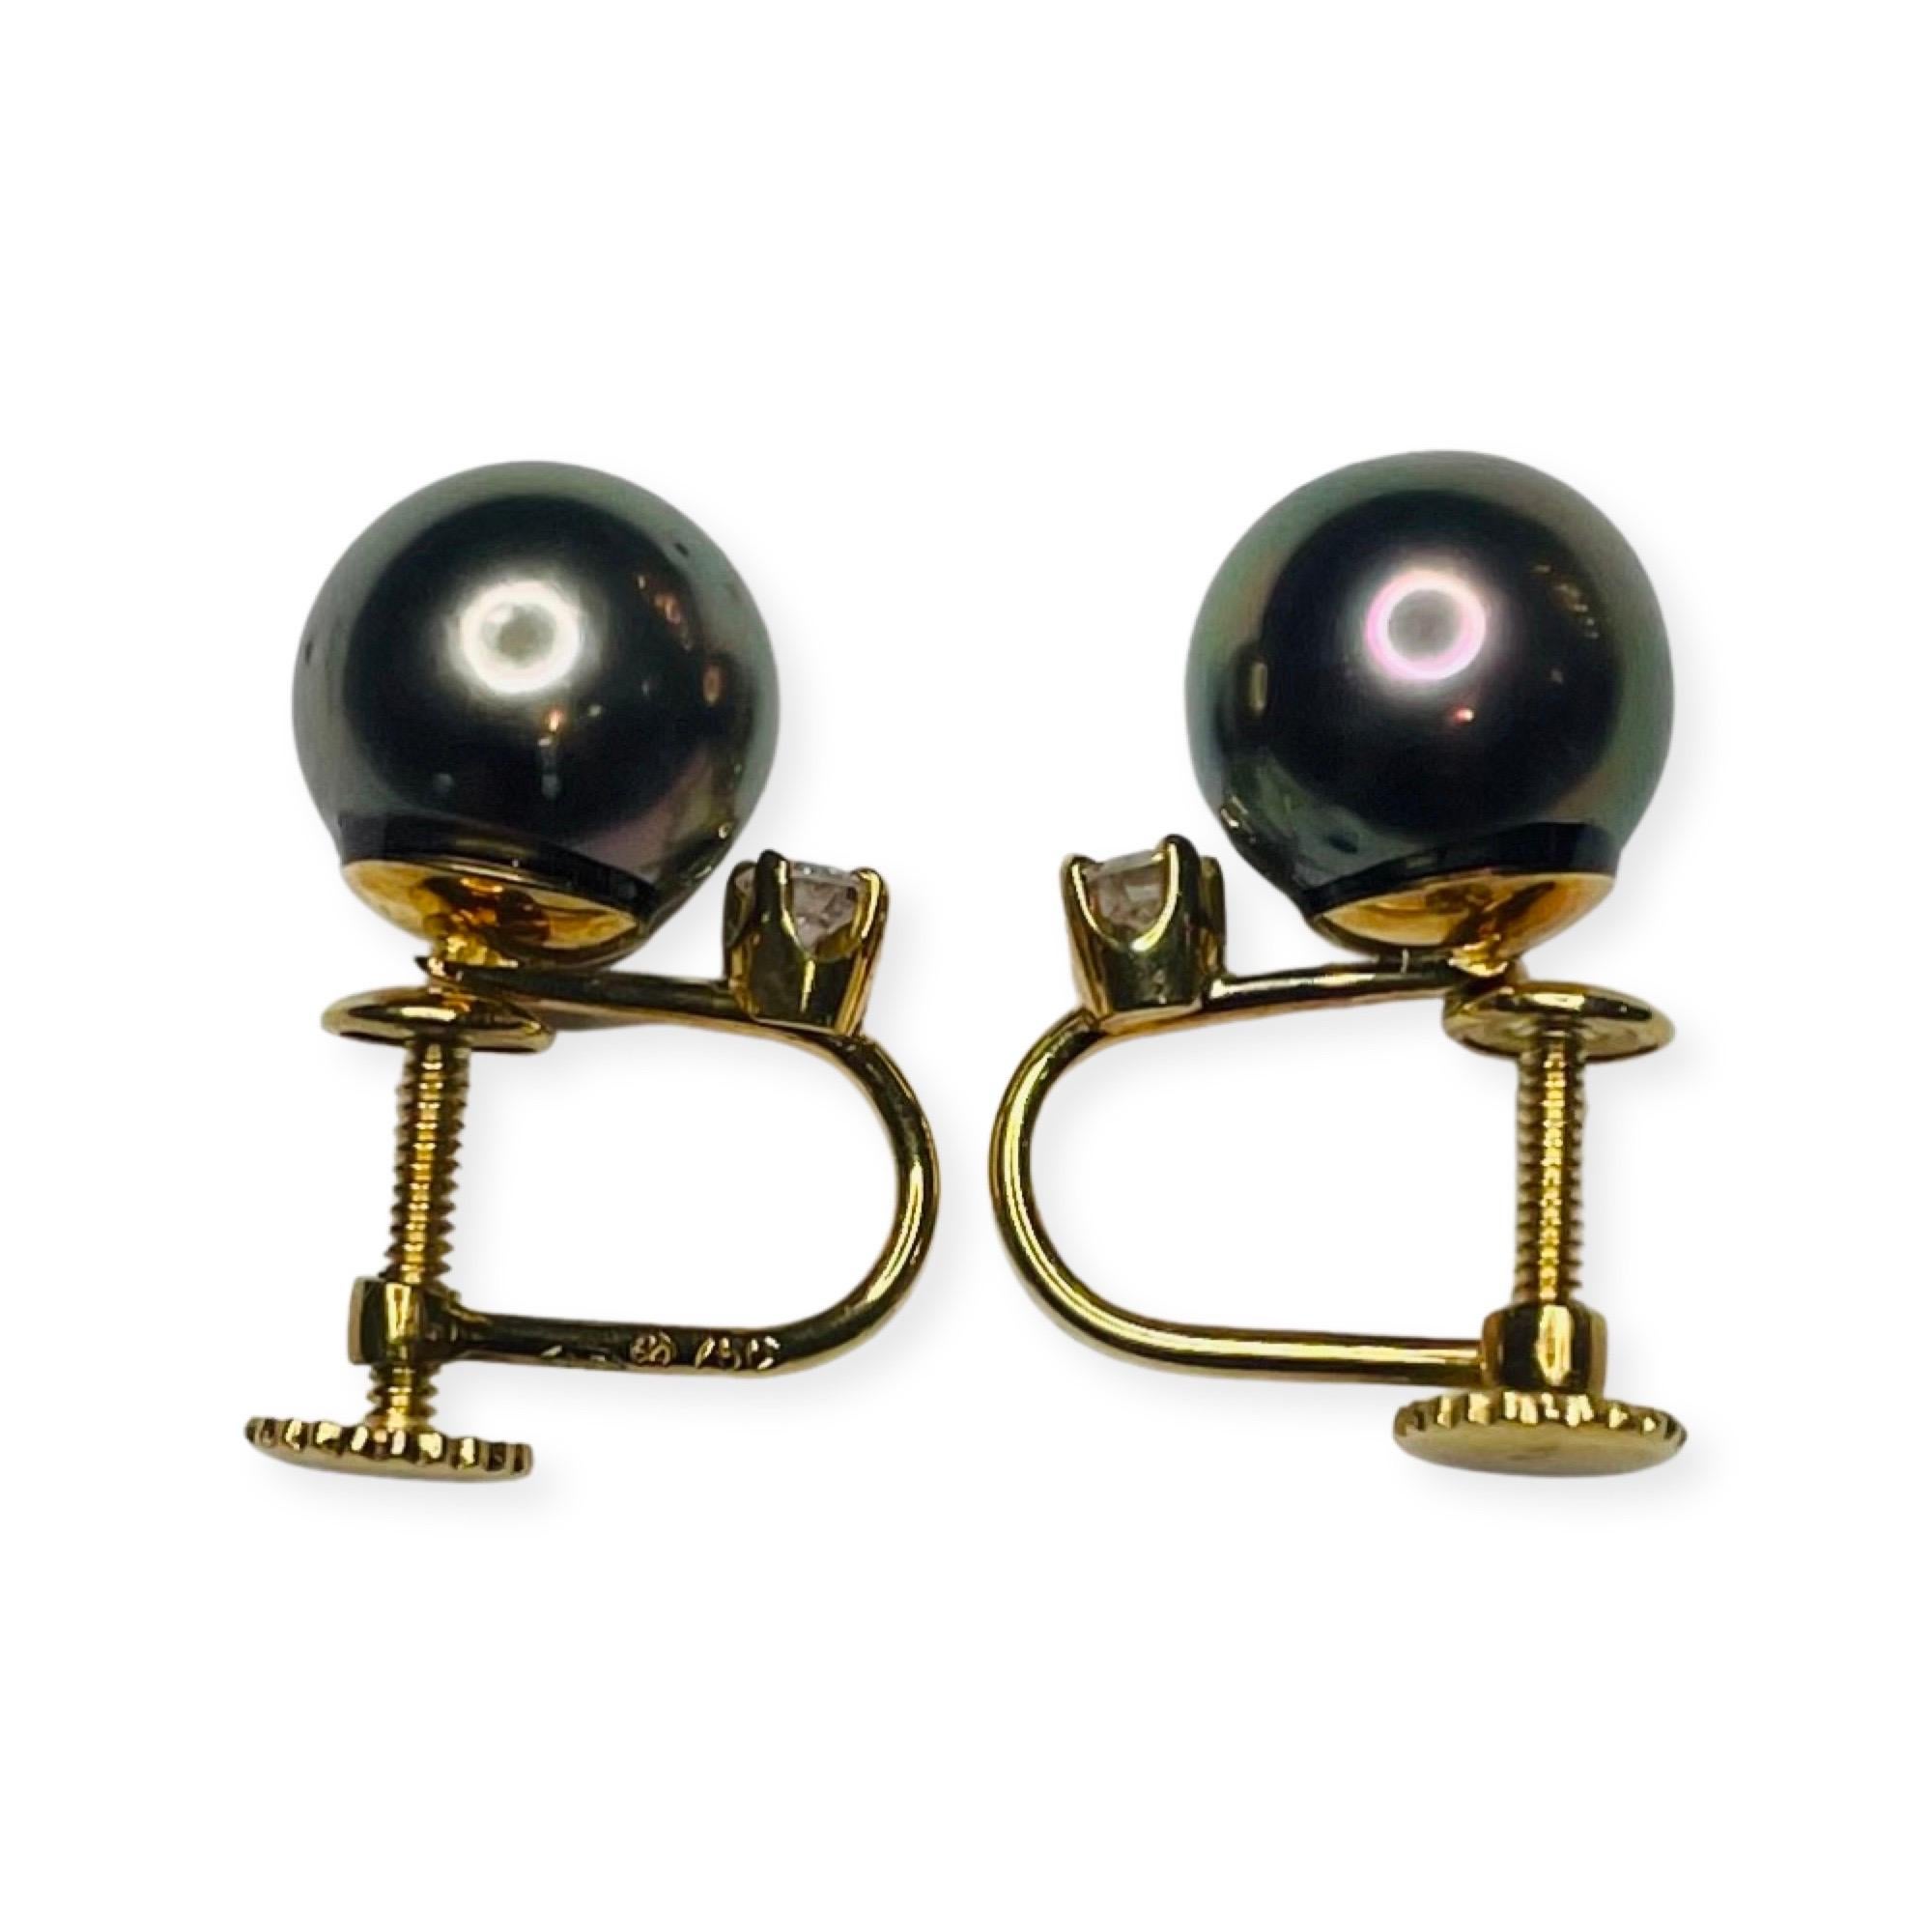 Lithos 18K Yellow Gold, Natural Color, Cultured, Black Tahitian Pearl Screw Back Earrings. The Pearls are 10.0 mm. The pearls are full and round.  They have slight blemish, high luster and a rose overtone. There are 2, full cut, round brilliant